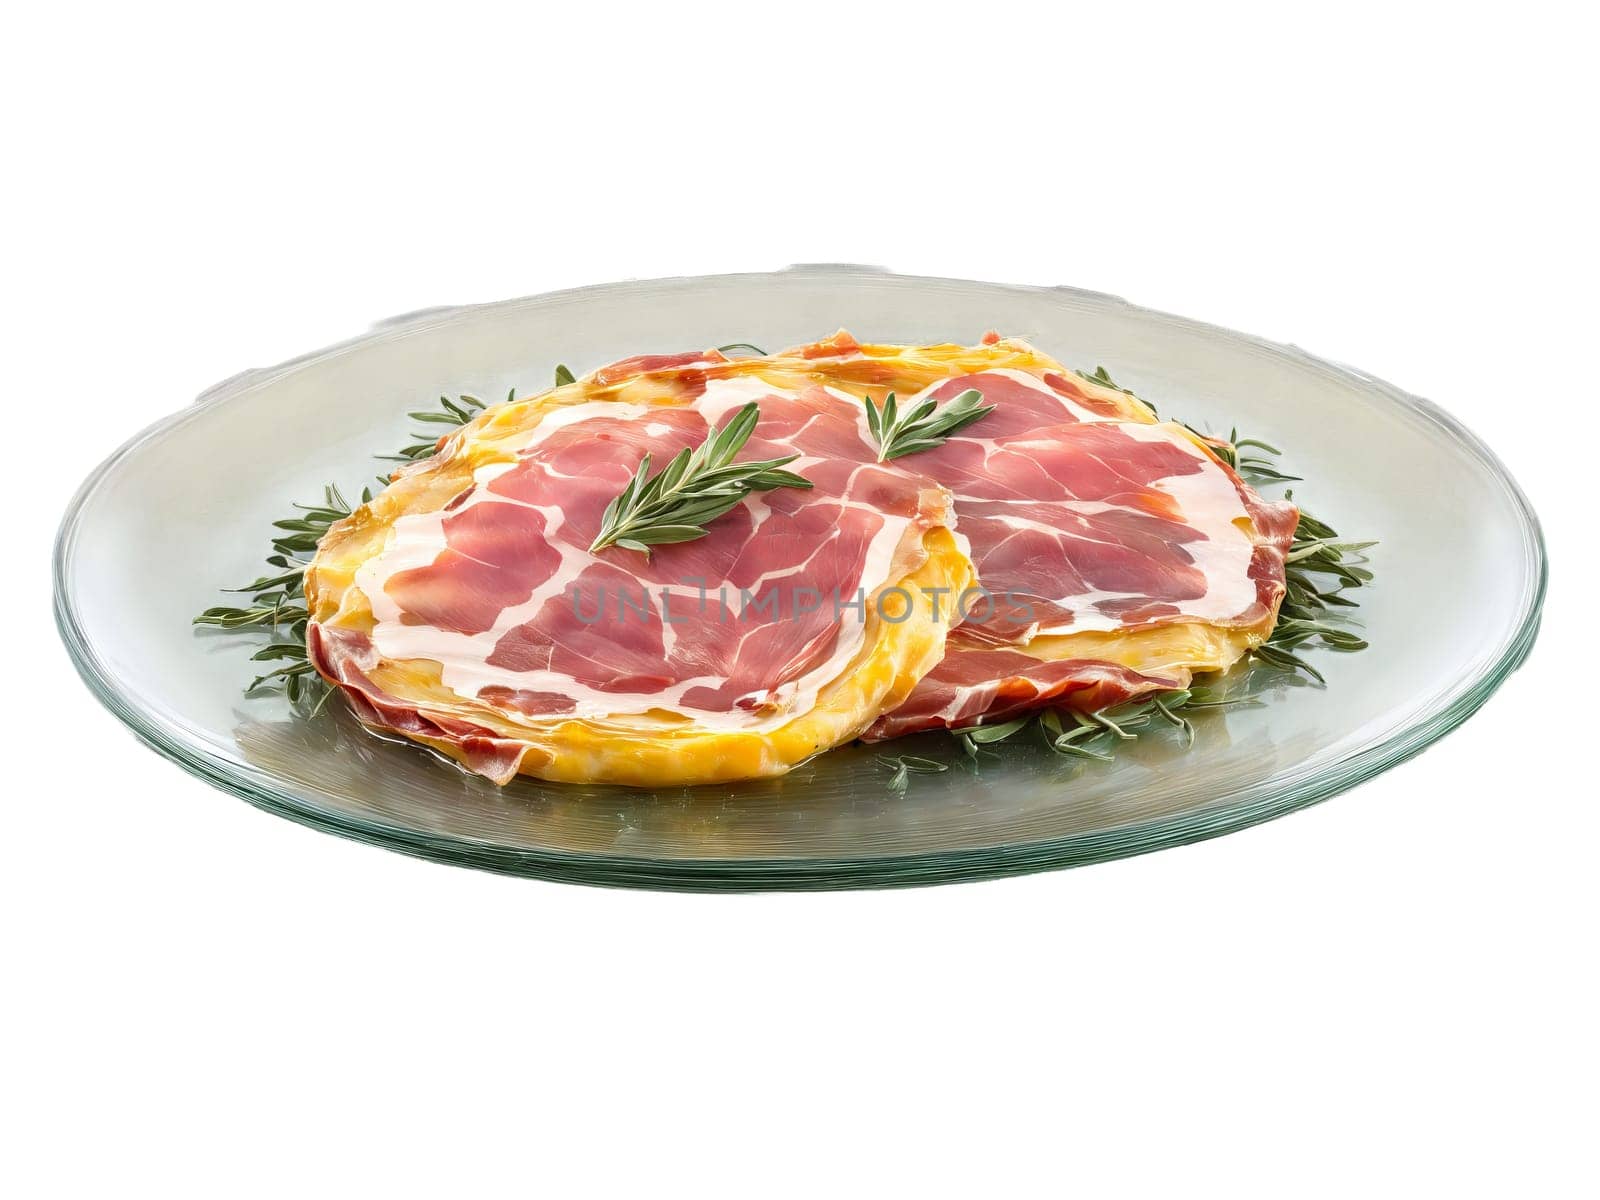 Saltimbocca alla Romana veal topped with prosciutto and sage served on a transparent glass plate. Food isolated on transparent background.